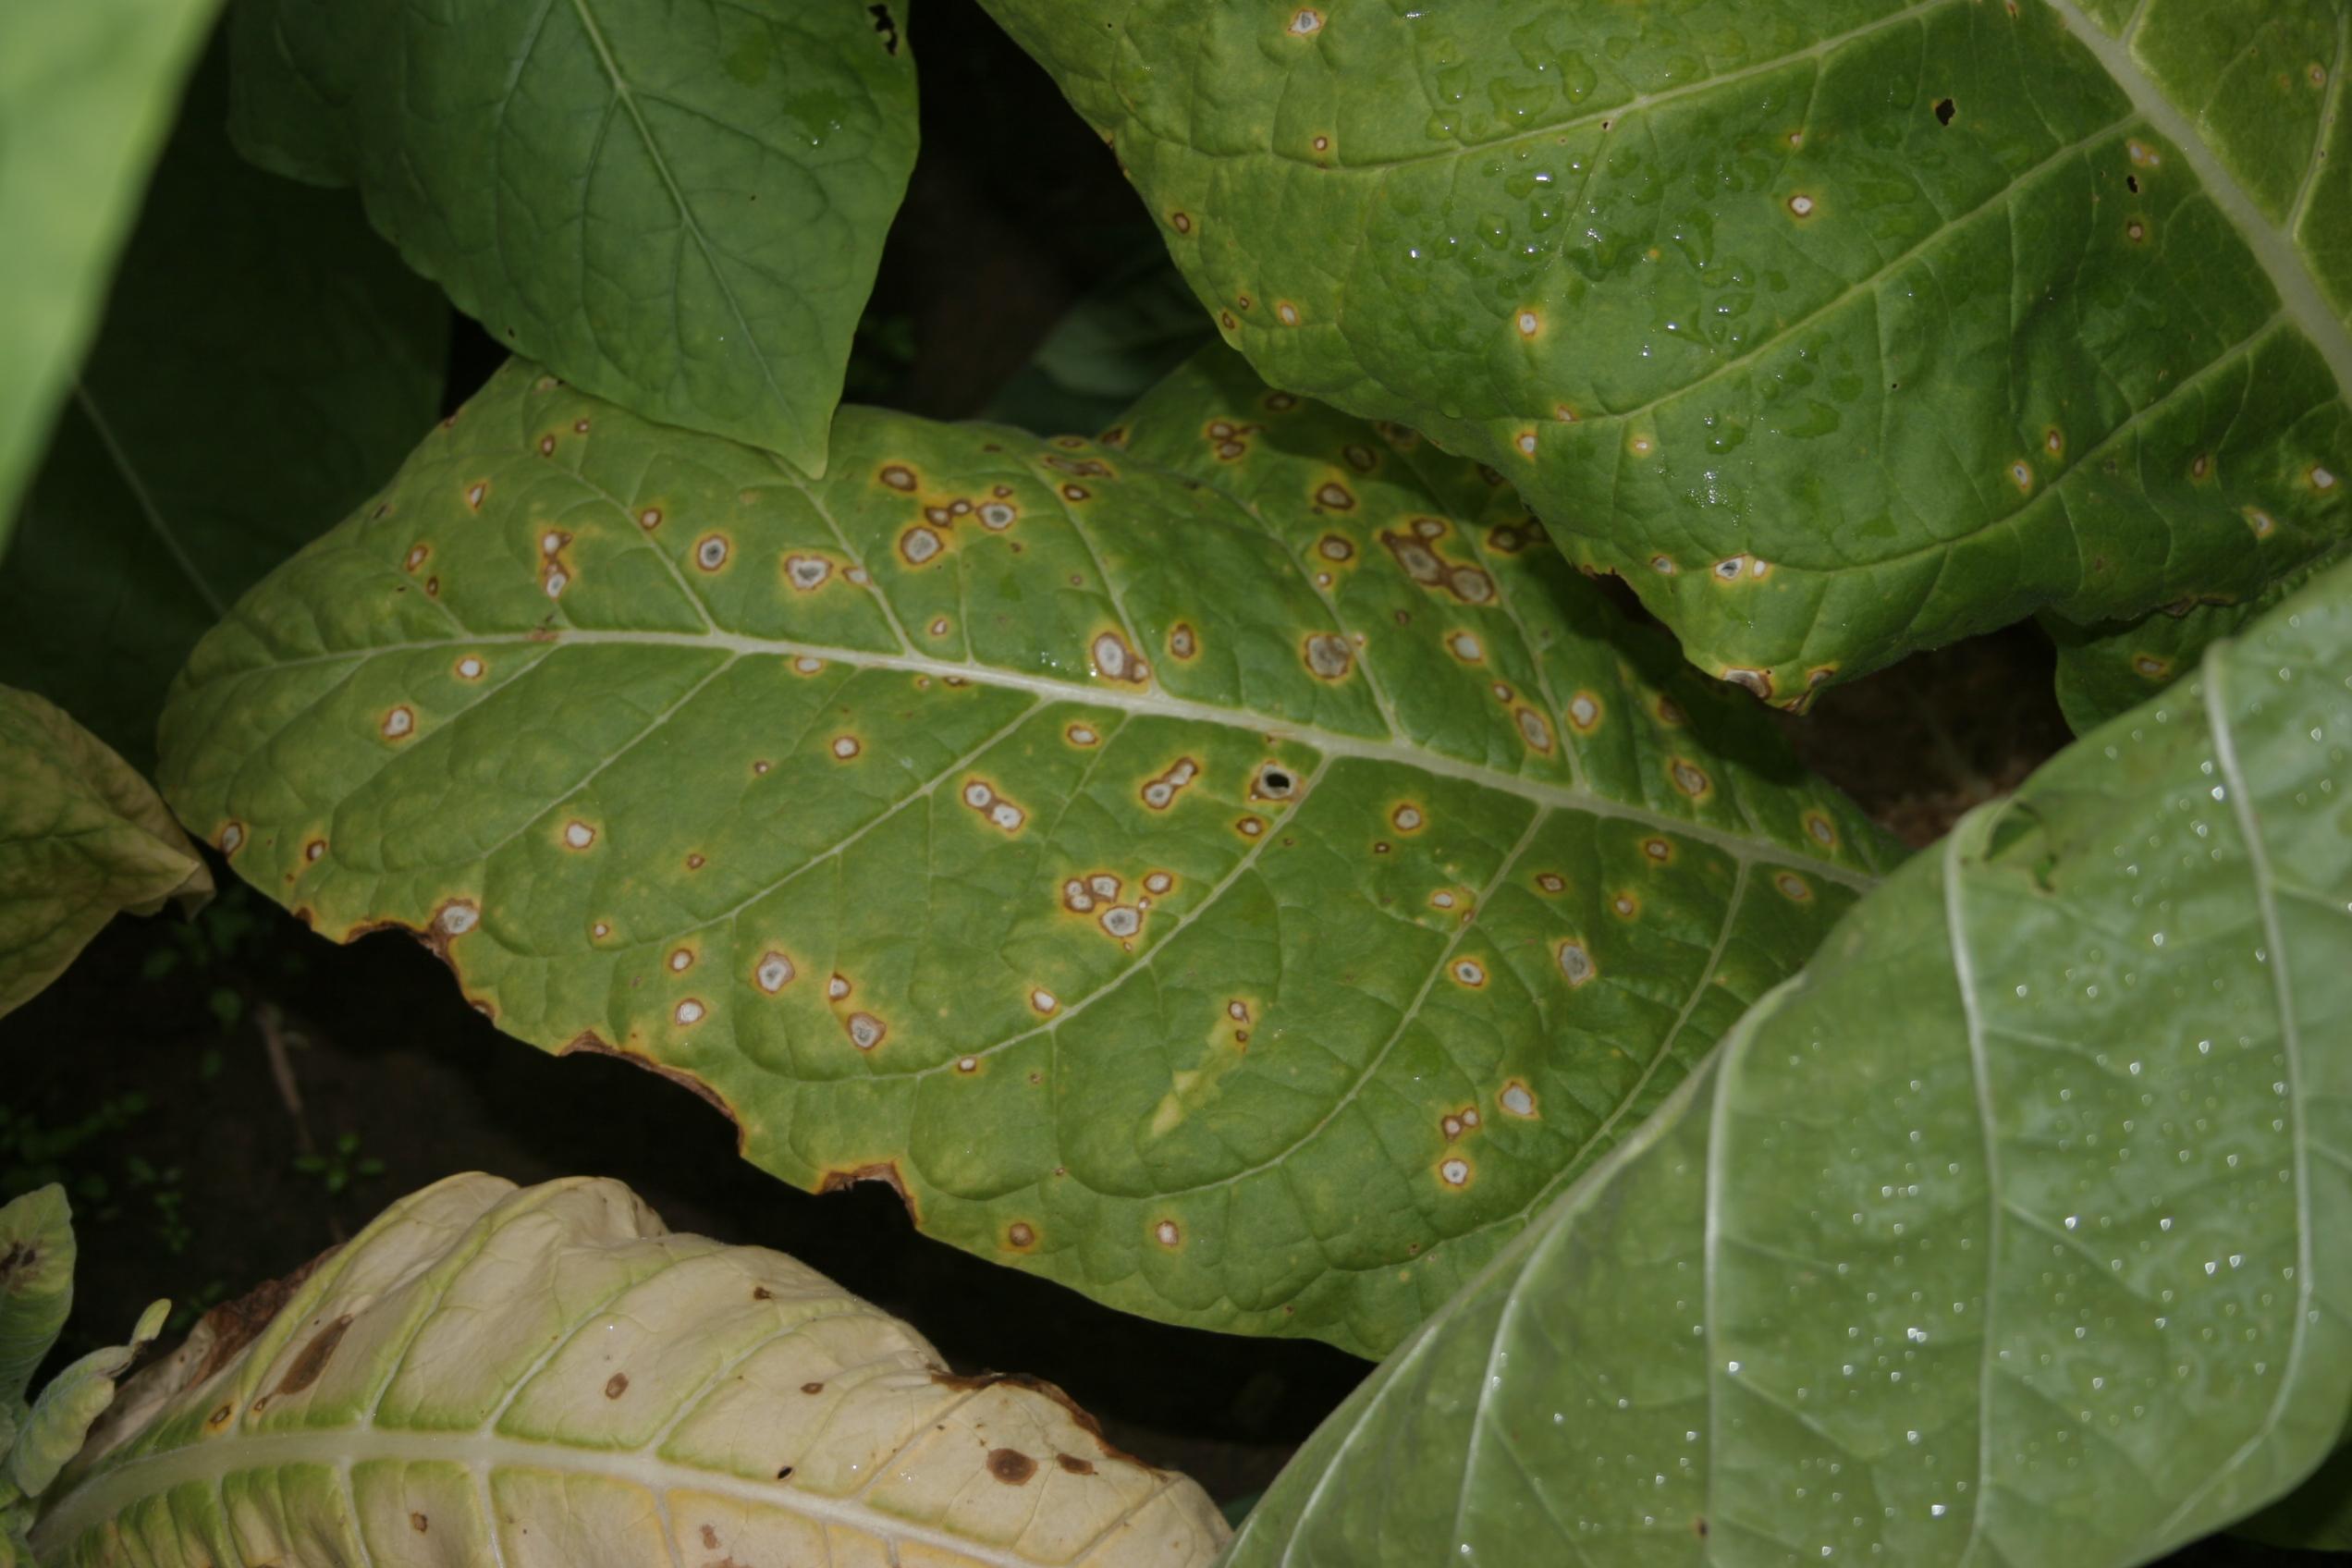 Frogeye usually first appears on lower leaves, moving up as the season progresses.  If tobacco is cut shortly after initial infections, the spots may cure green. (Photo: Kenneth Seebold, UK)